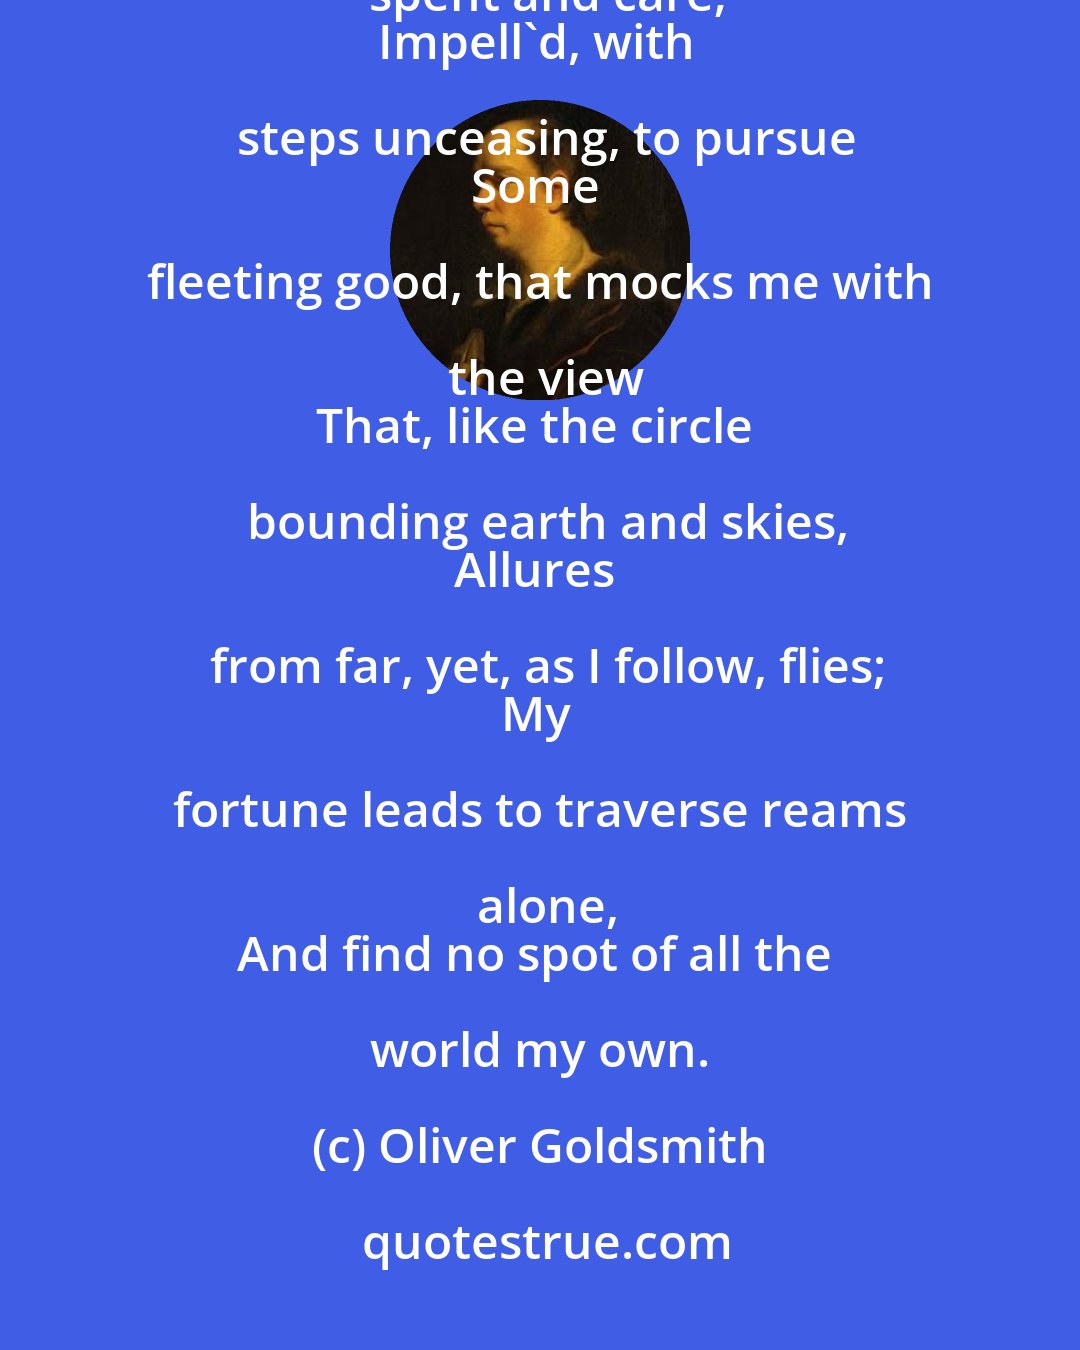 Oliver Goldsmith: But me, not destined such delights to share,
My prime of life in wandering spent and care;
Impell'd, with steps unceasing, to pursue
Some fleeting good, that mocks me with the view
That, like the circle bounding earth and skies,
Allures from far, yet, as I follow, flies;
My fortune leads to traverse reams alone,
And find no spot of all the world my own.